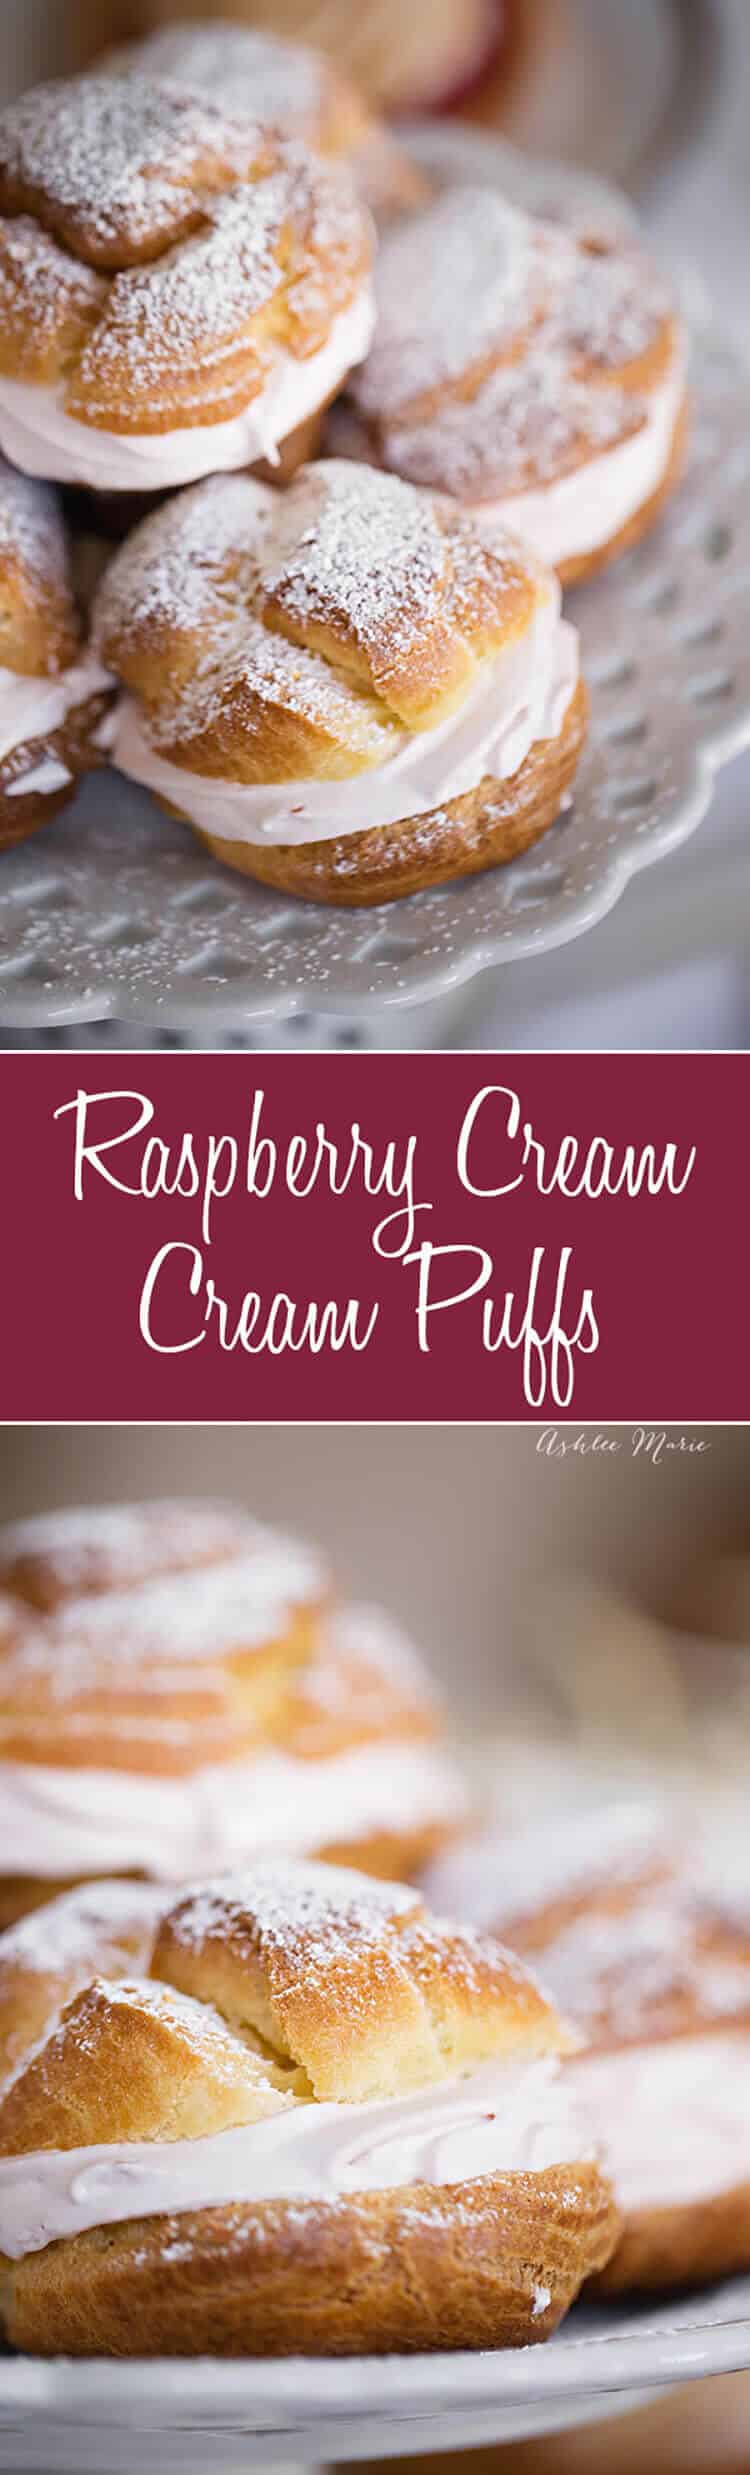 Easy to make cream puffs (with a video tutorial) and filled with a delicious raspberry whipped cream